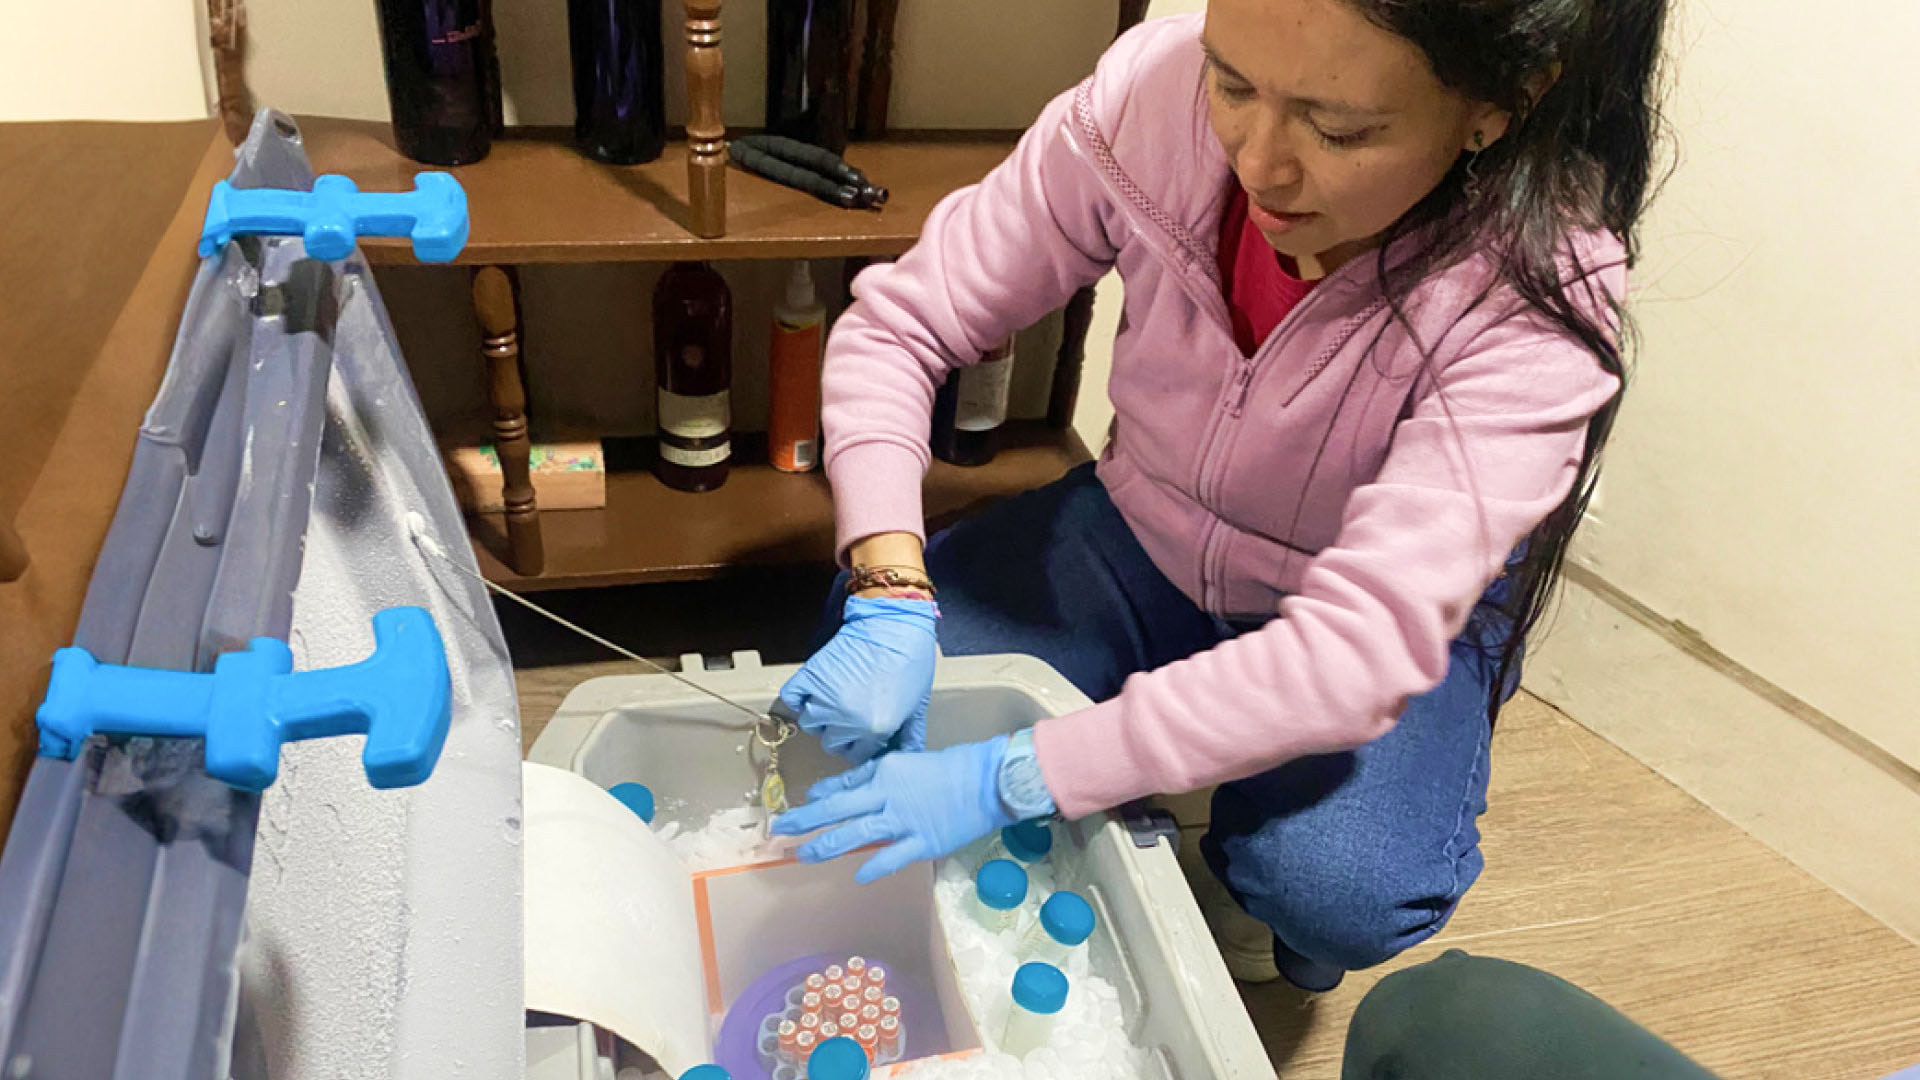 A researcher with long brown hair in a pink hoodie, wearing blue gloves, arranges samples with blue lids in a large cooler filled with dry ice.